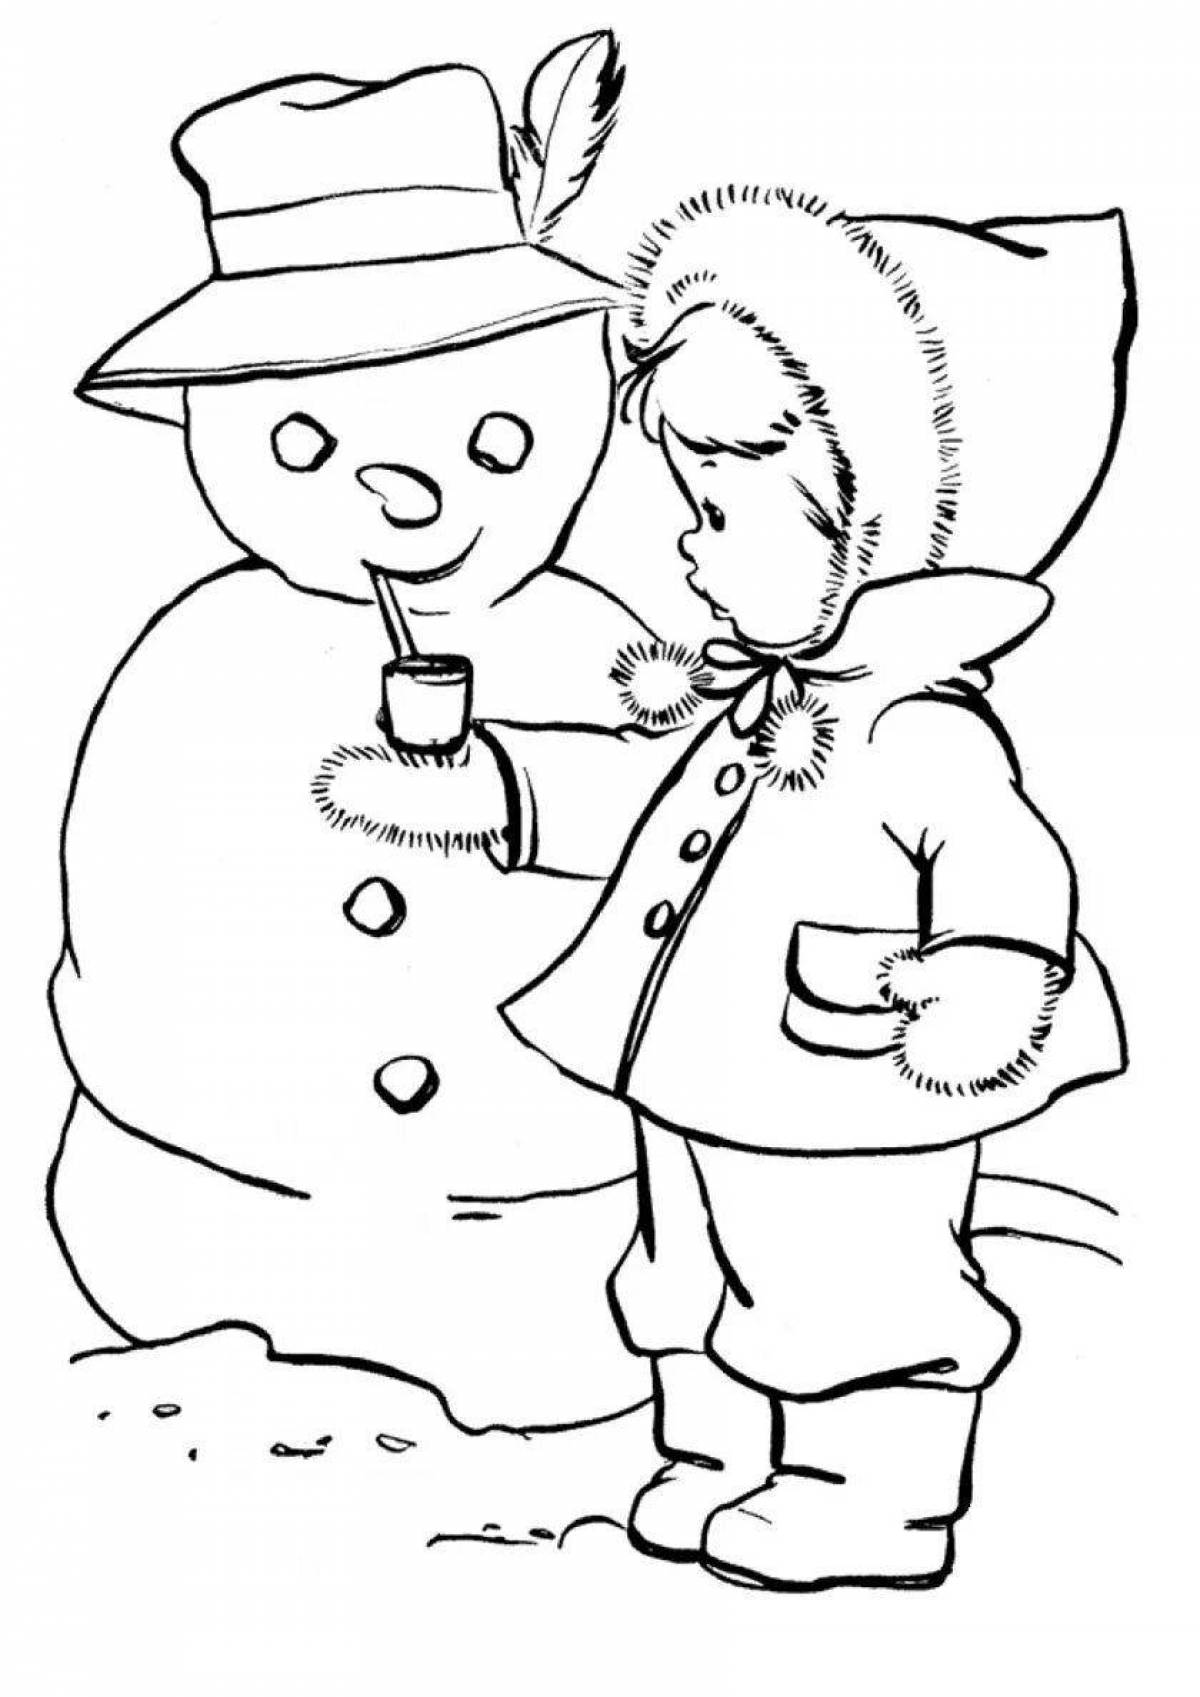 Rave coloring book for kids outside in winter